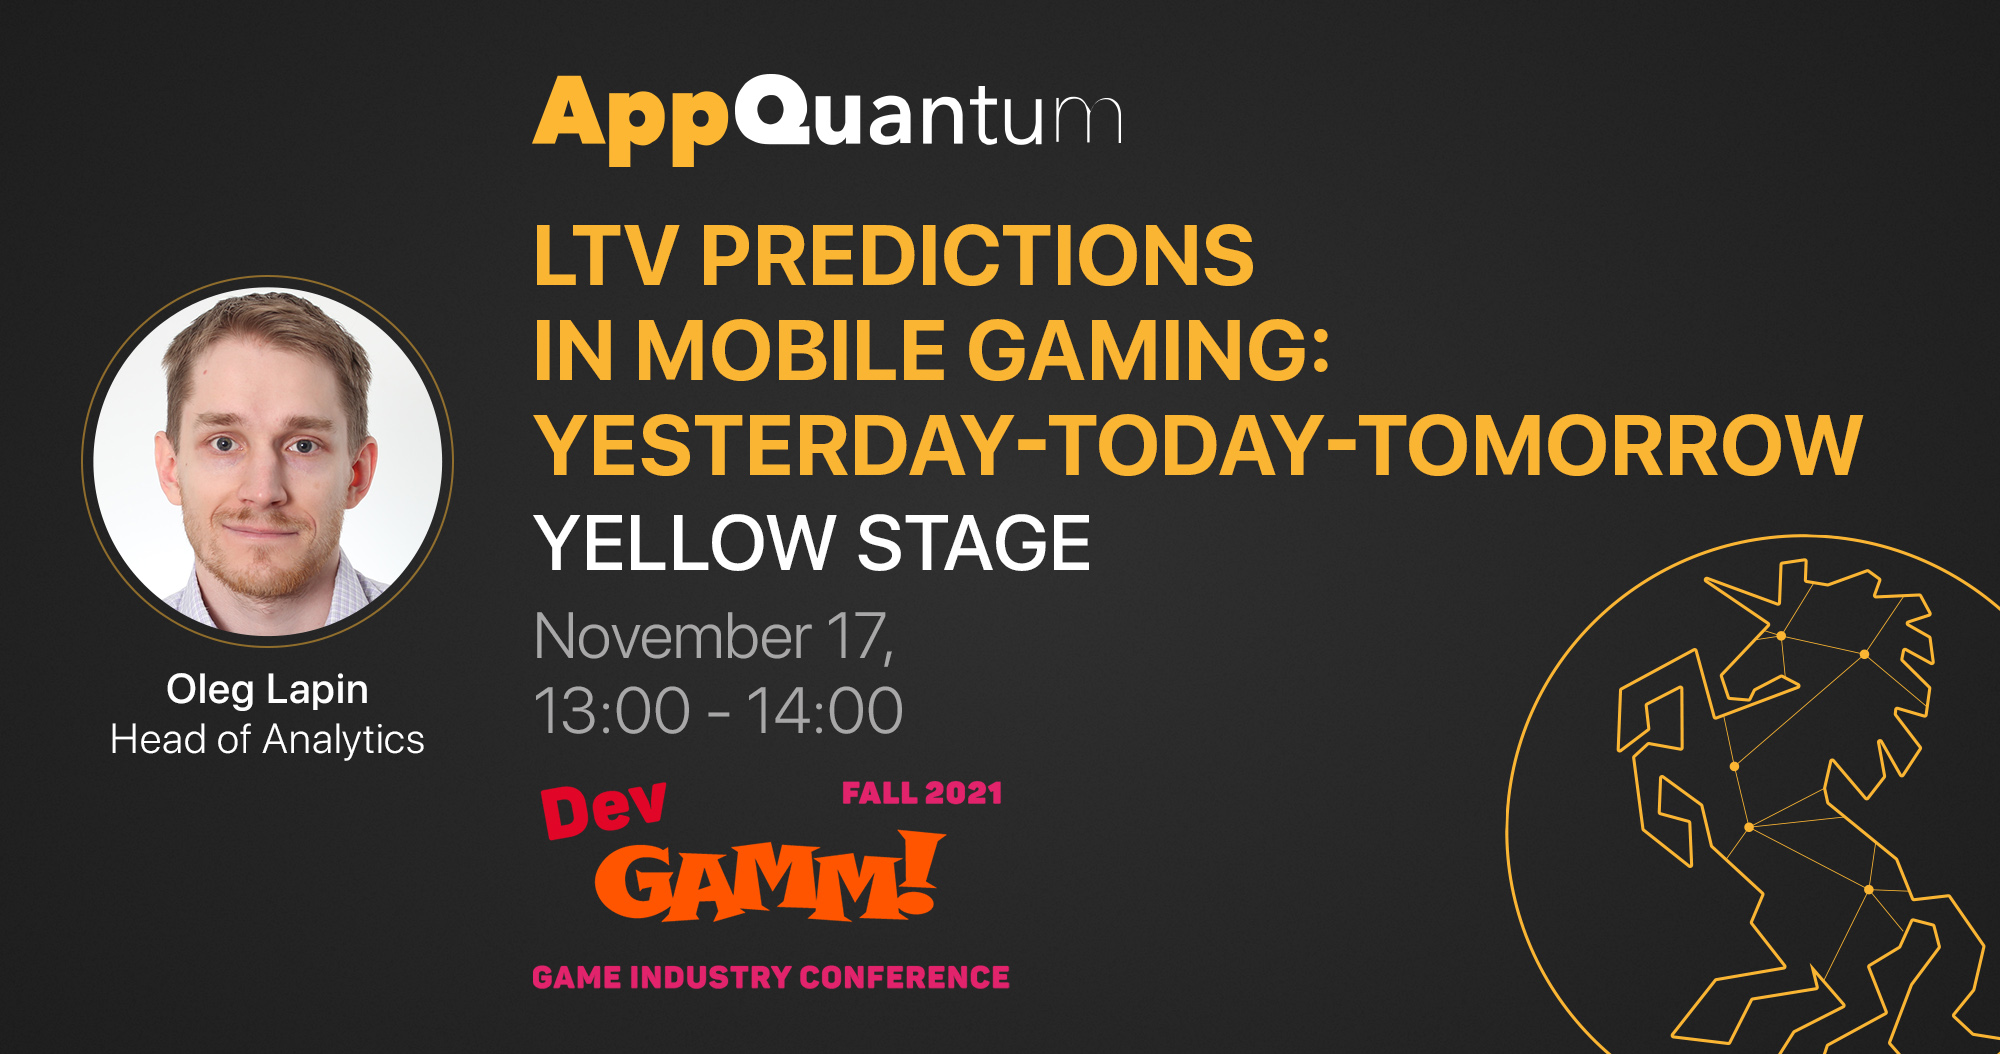 Oleg Lapin Will Talk About LTV Predictions in Mobile Gaming at DevGAMM Fall 2021